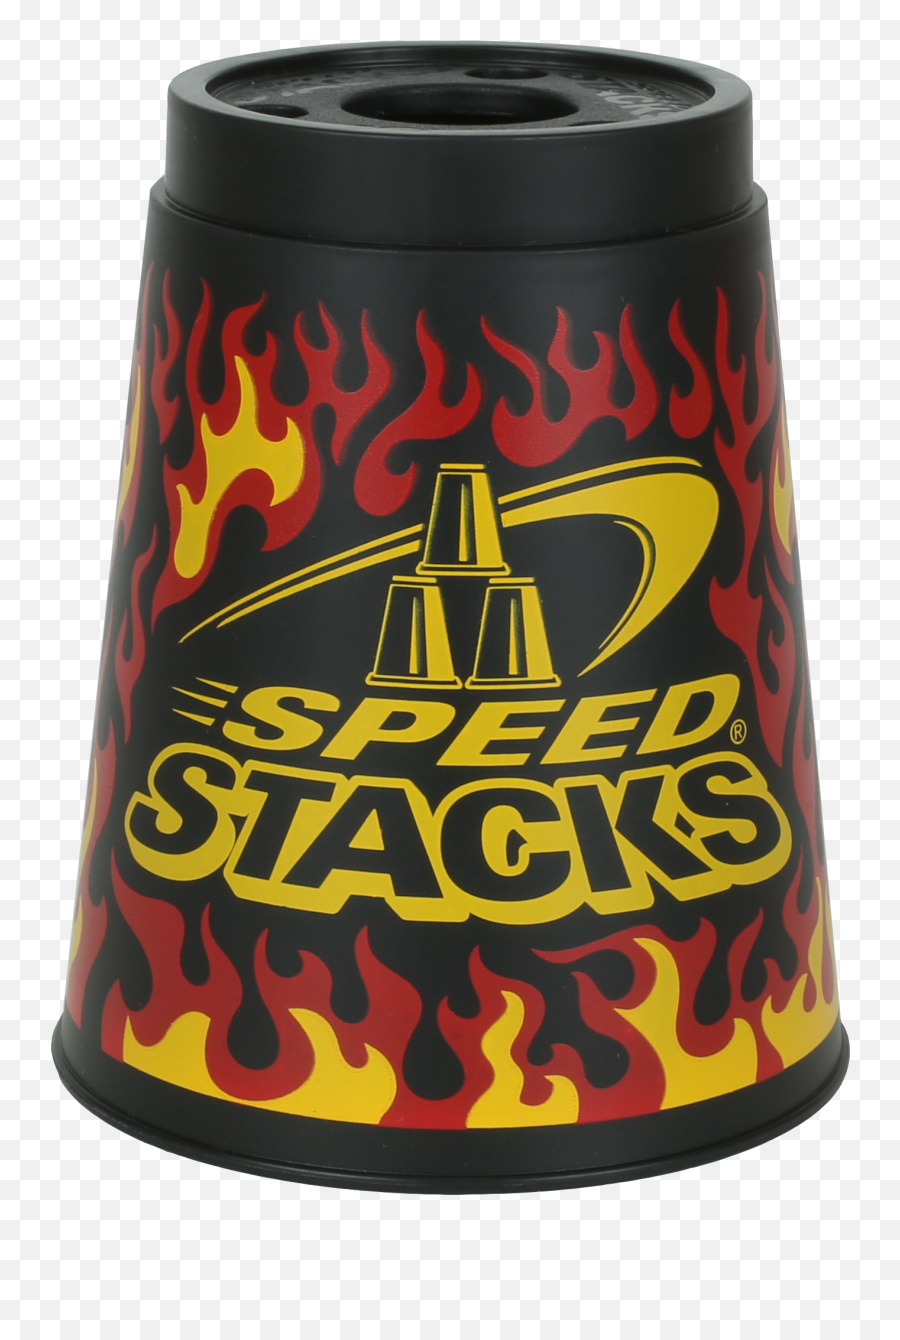 Download Black Flames St Cup 2 - Speed Stacks Black Flames Png,Black Flames Png